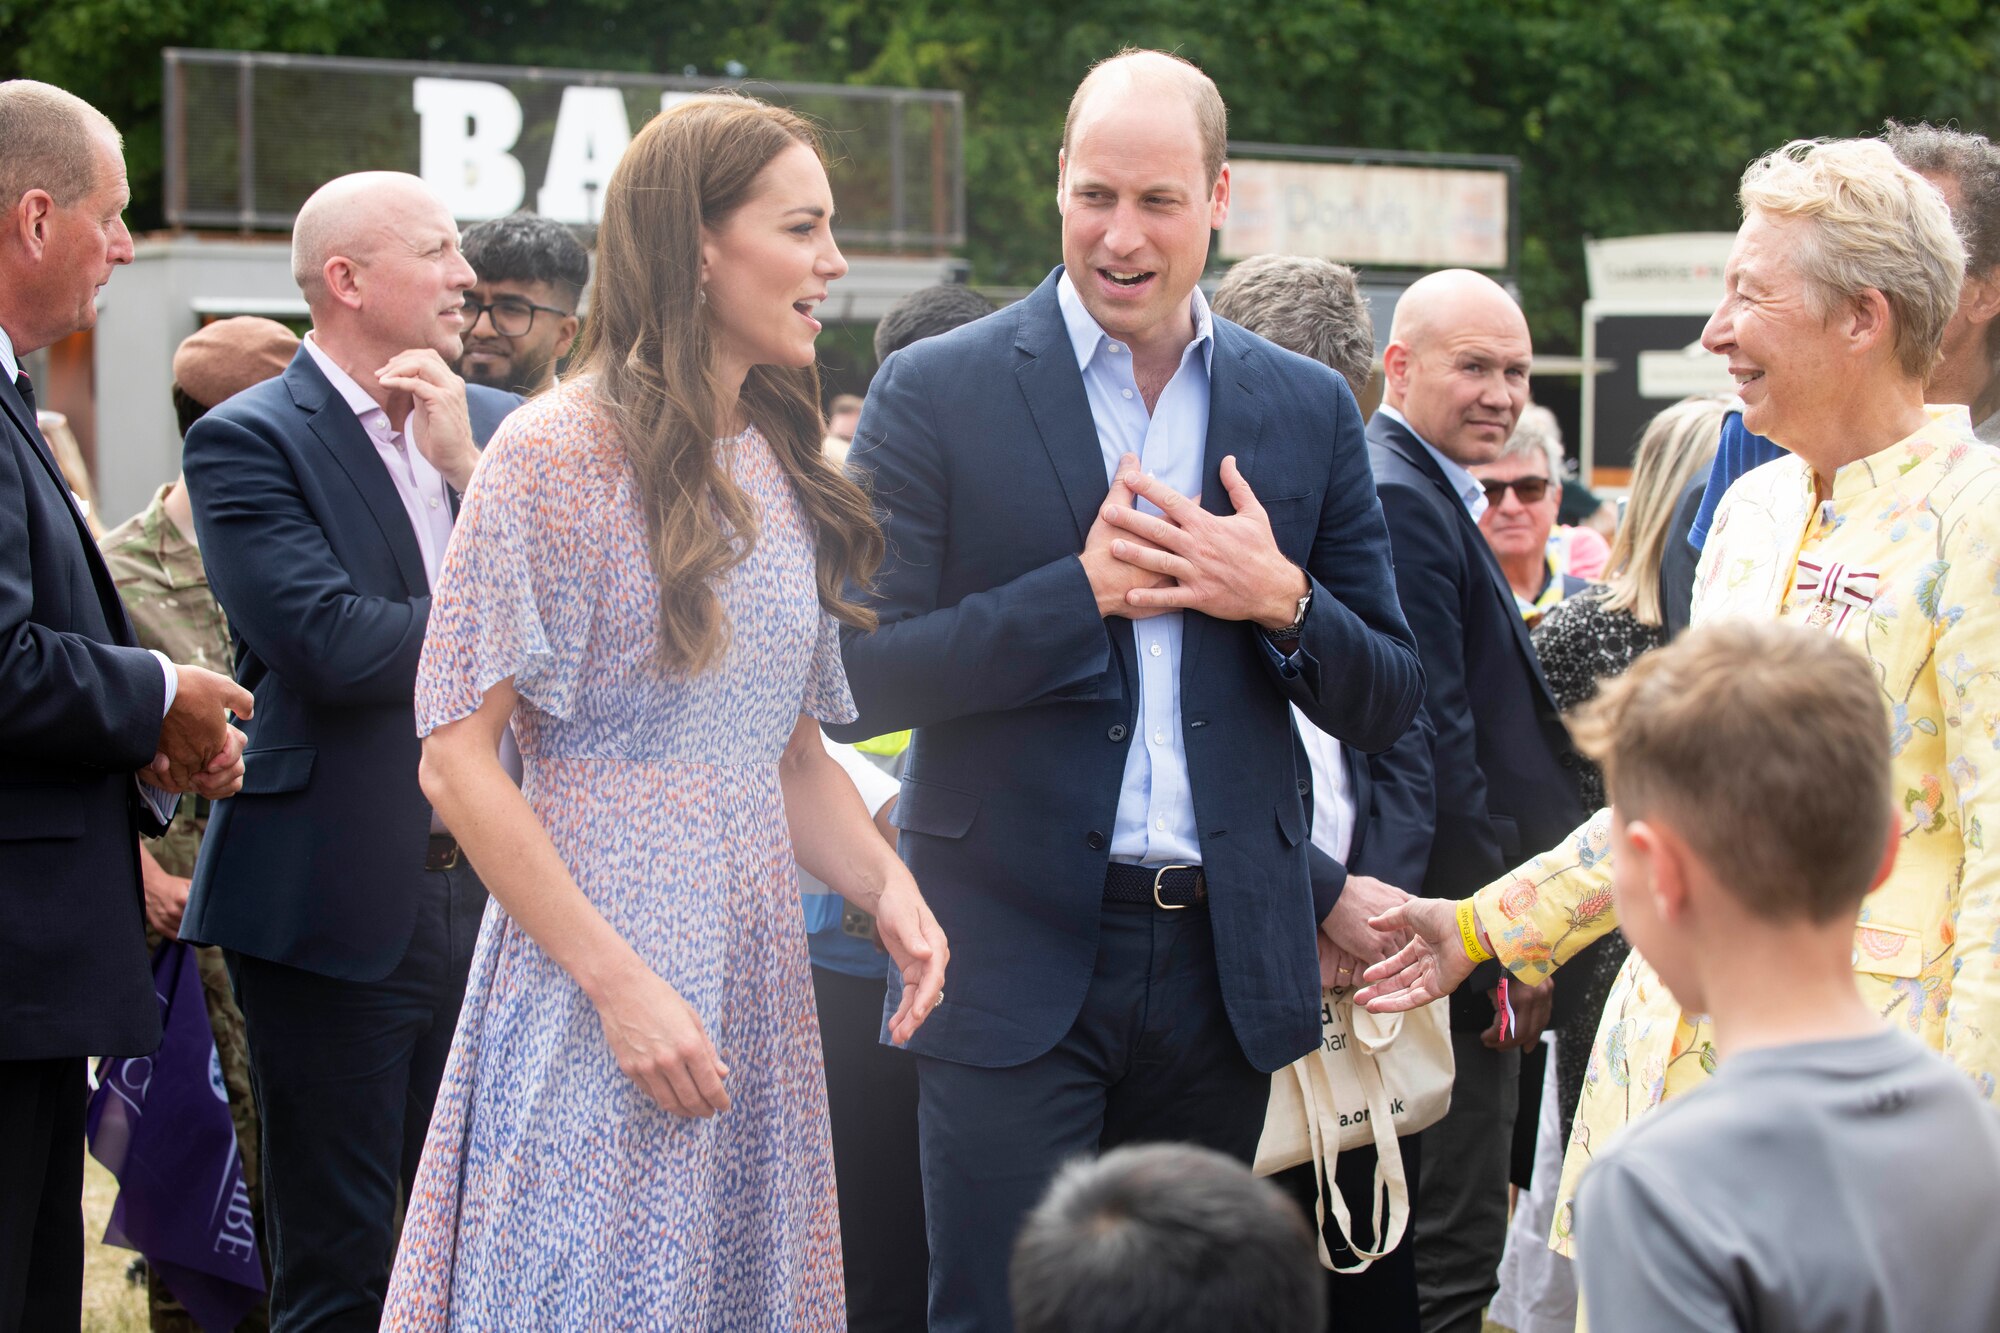 Their Royal Highnesses Prince William and Catherine, Duke and Duchess of Cambridge, and Mrs. Julie Spence, Lord Lieutenant of Cambridgeshire, engage with attendees at the Cambridgeshire County Day at the Newmarket July Course, England, June 23, 2022. The County Day was an opportunity to celebrate Cambridgeshire and Her Majesty The Queen’s Platinum Jubilee. (U.S. Air Force photo by Senior Airman Jennifer Zima)